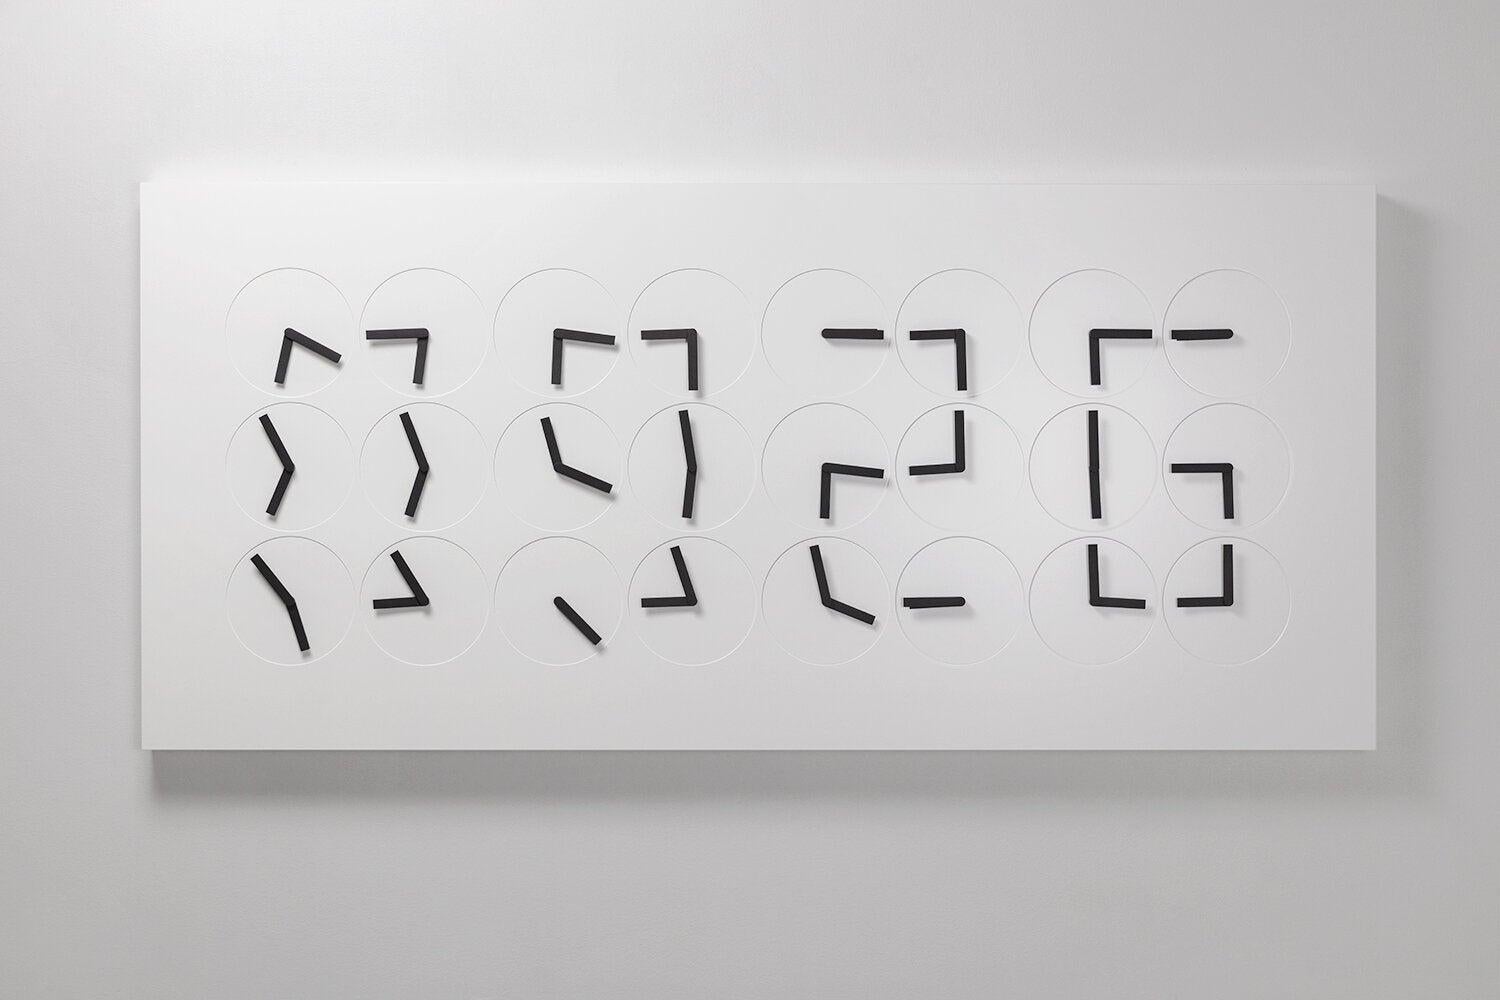 ClockClock 24 is both a kinetic sculpture and a functioning wall clock. It has been a signature piece of Humans since 1982 since it was first launched in 2016. The individual clock hands veer from unpredictable, mechanical spinning to perfect